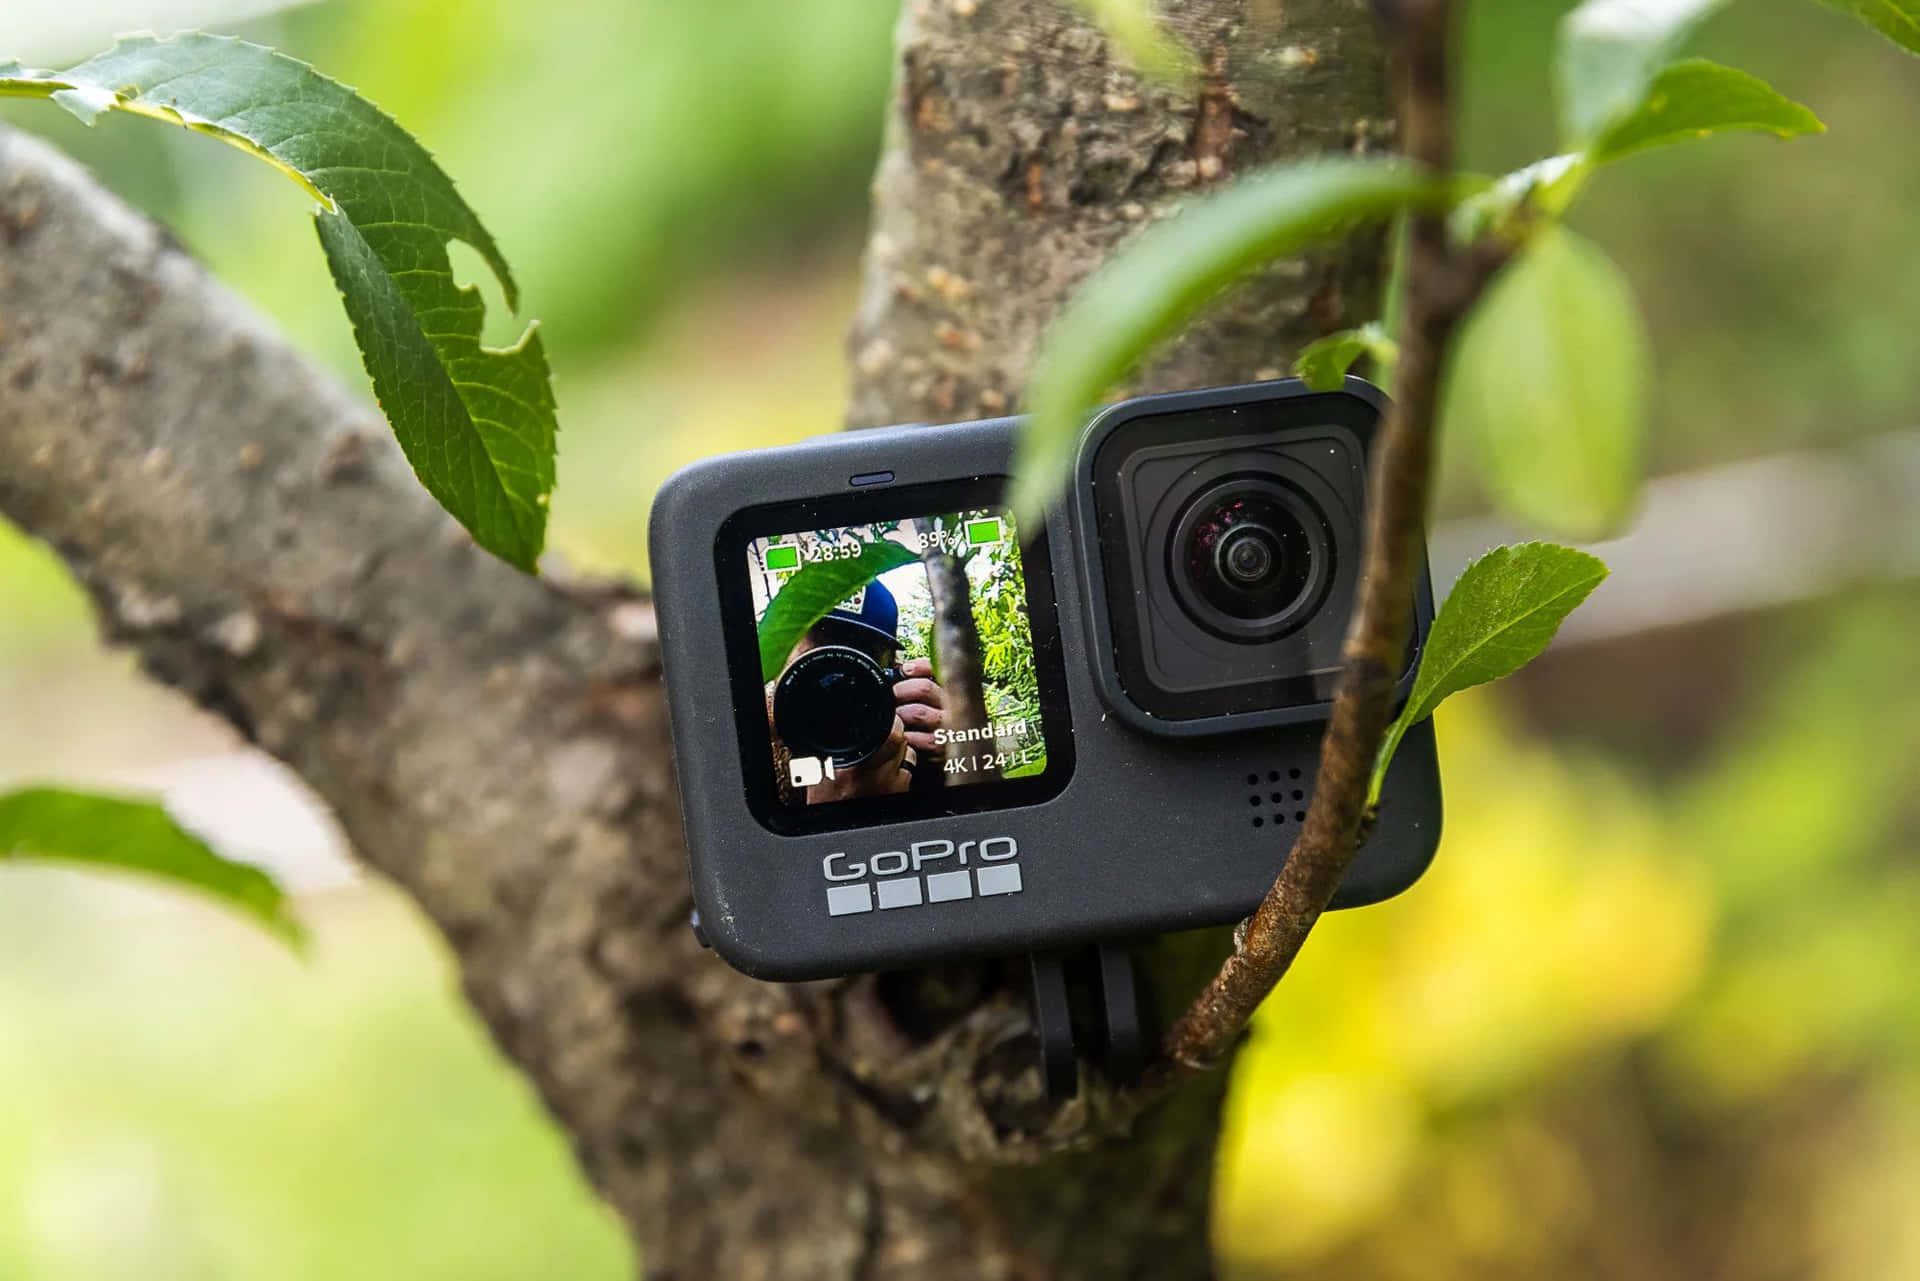 Capture incredible moments with GoPro